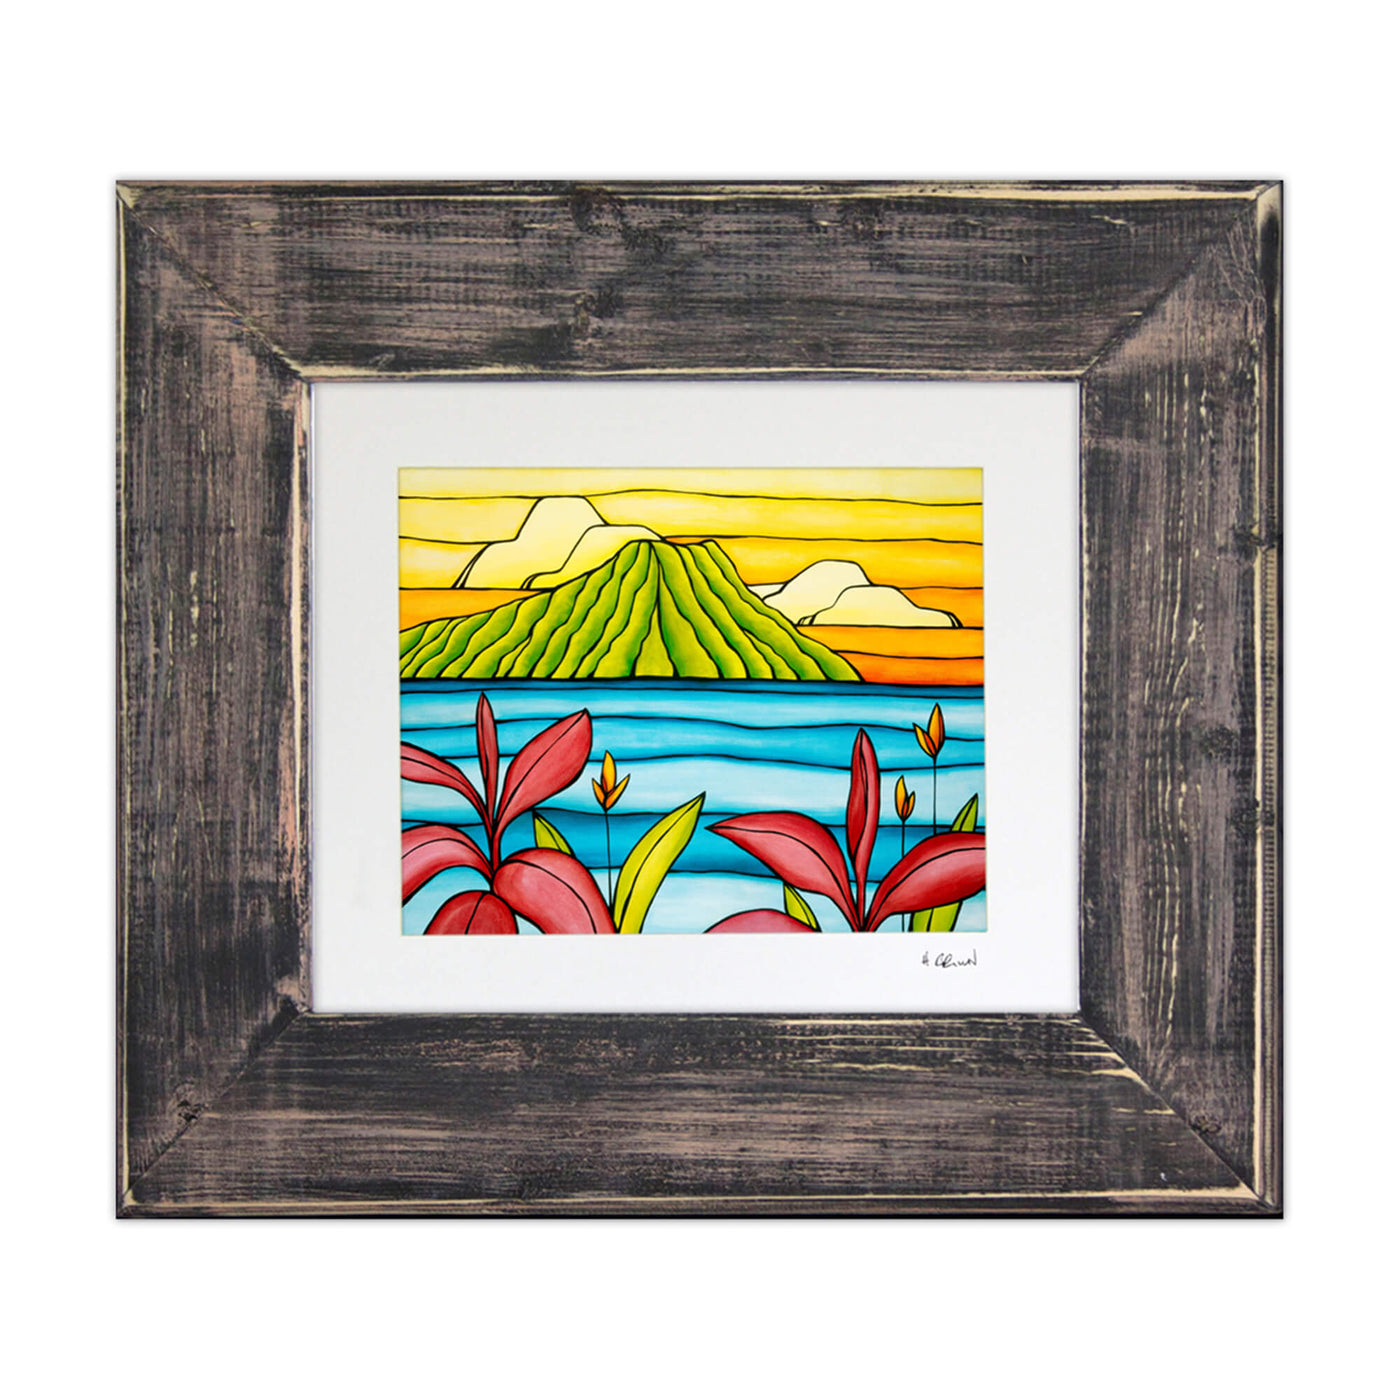 A framed matted art print featuring Diamond Head from a distance of calm waters framed by some beautiful tropical flowers by Hawaii surf artist Heather Brown